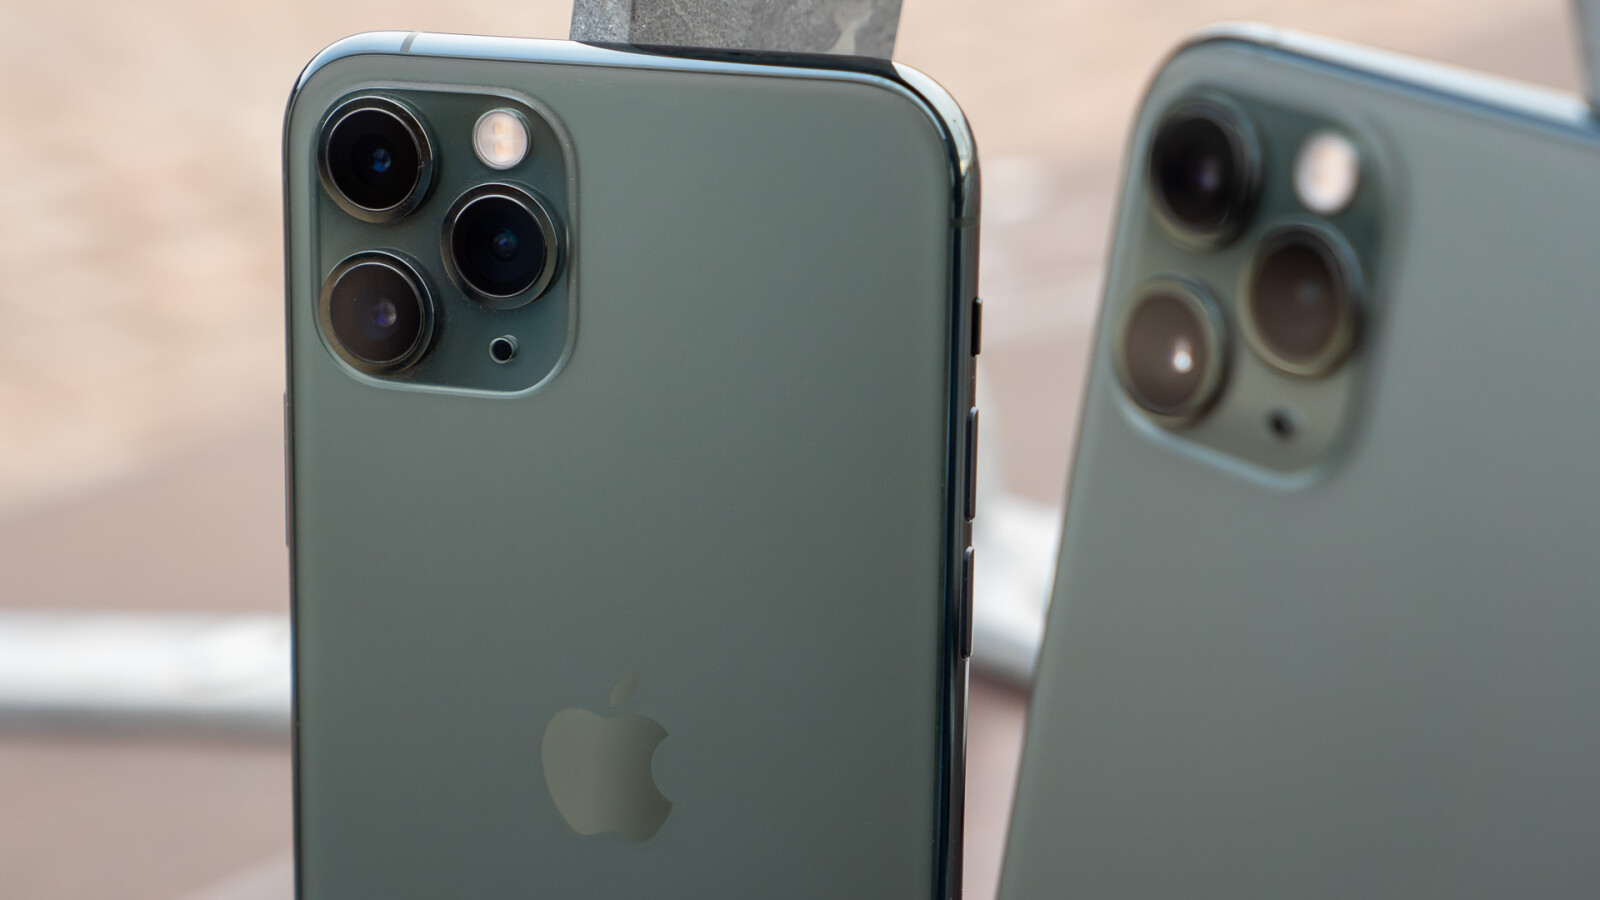 The maxed out iPhone 11 Pro Max costs $1,449